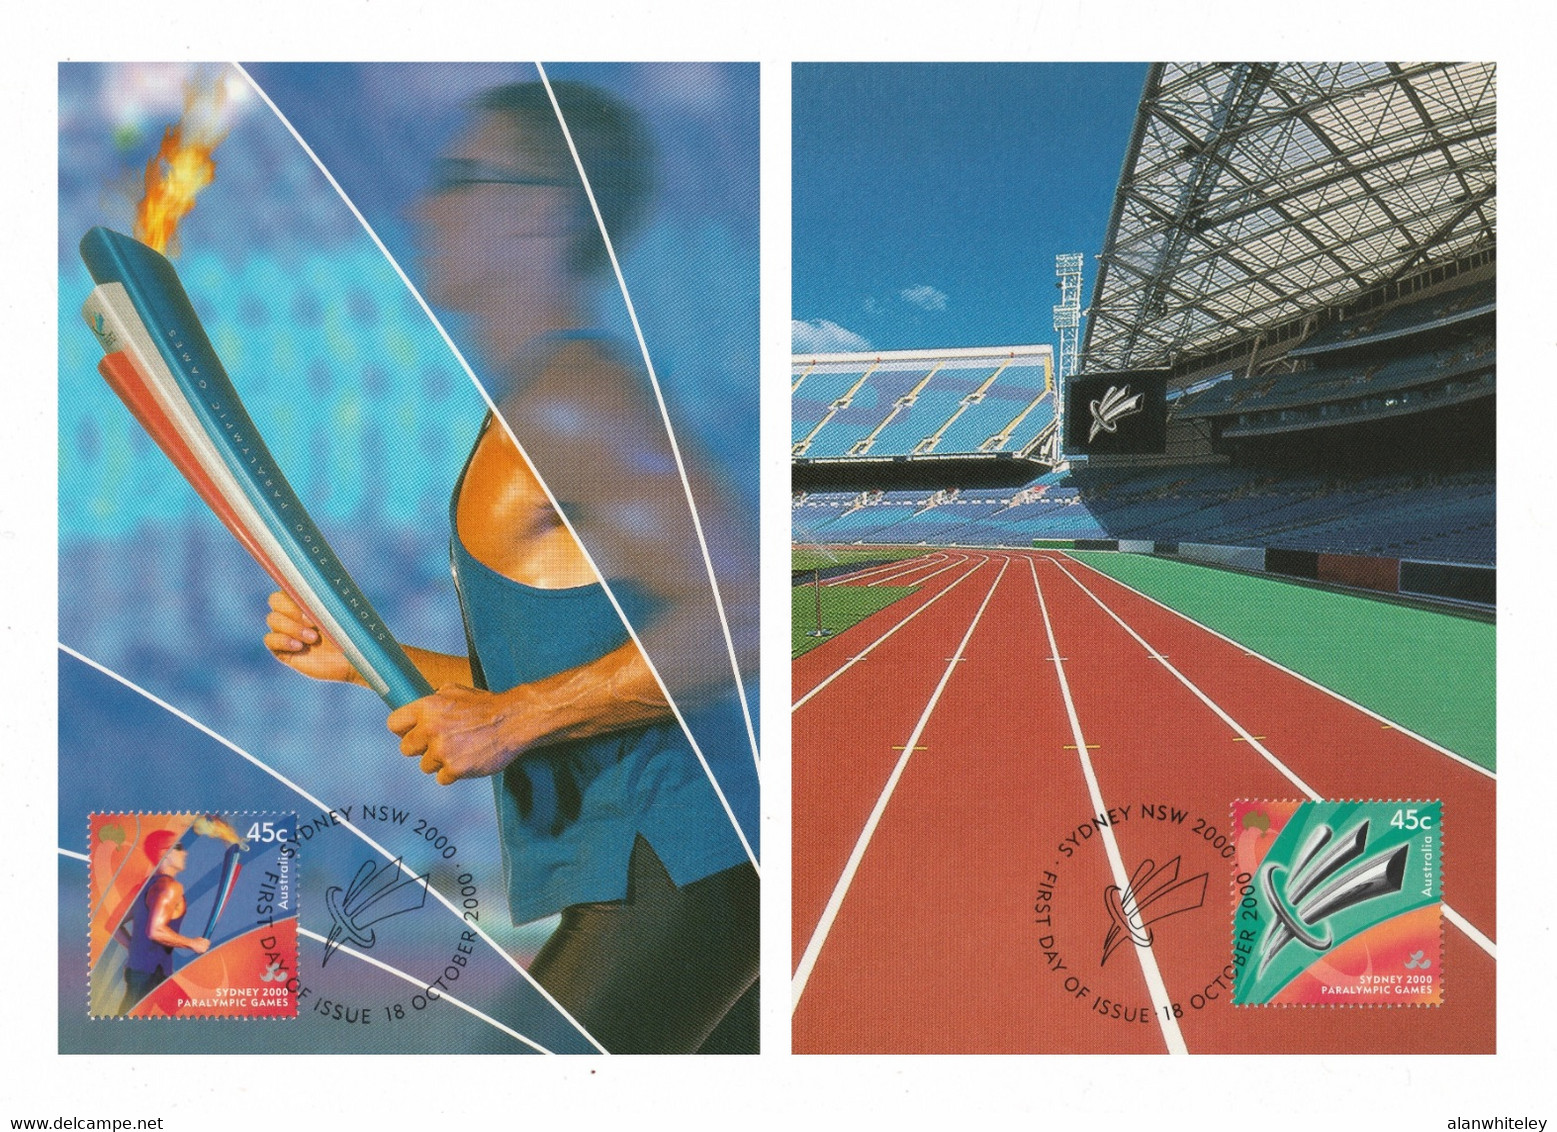 AUSTRALIA 2000 Sydney Paralympic Games (2nd Issue): Set Of 2 Maximum Cards CANCELLED - Verano 2000: Sydney - Paralympic